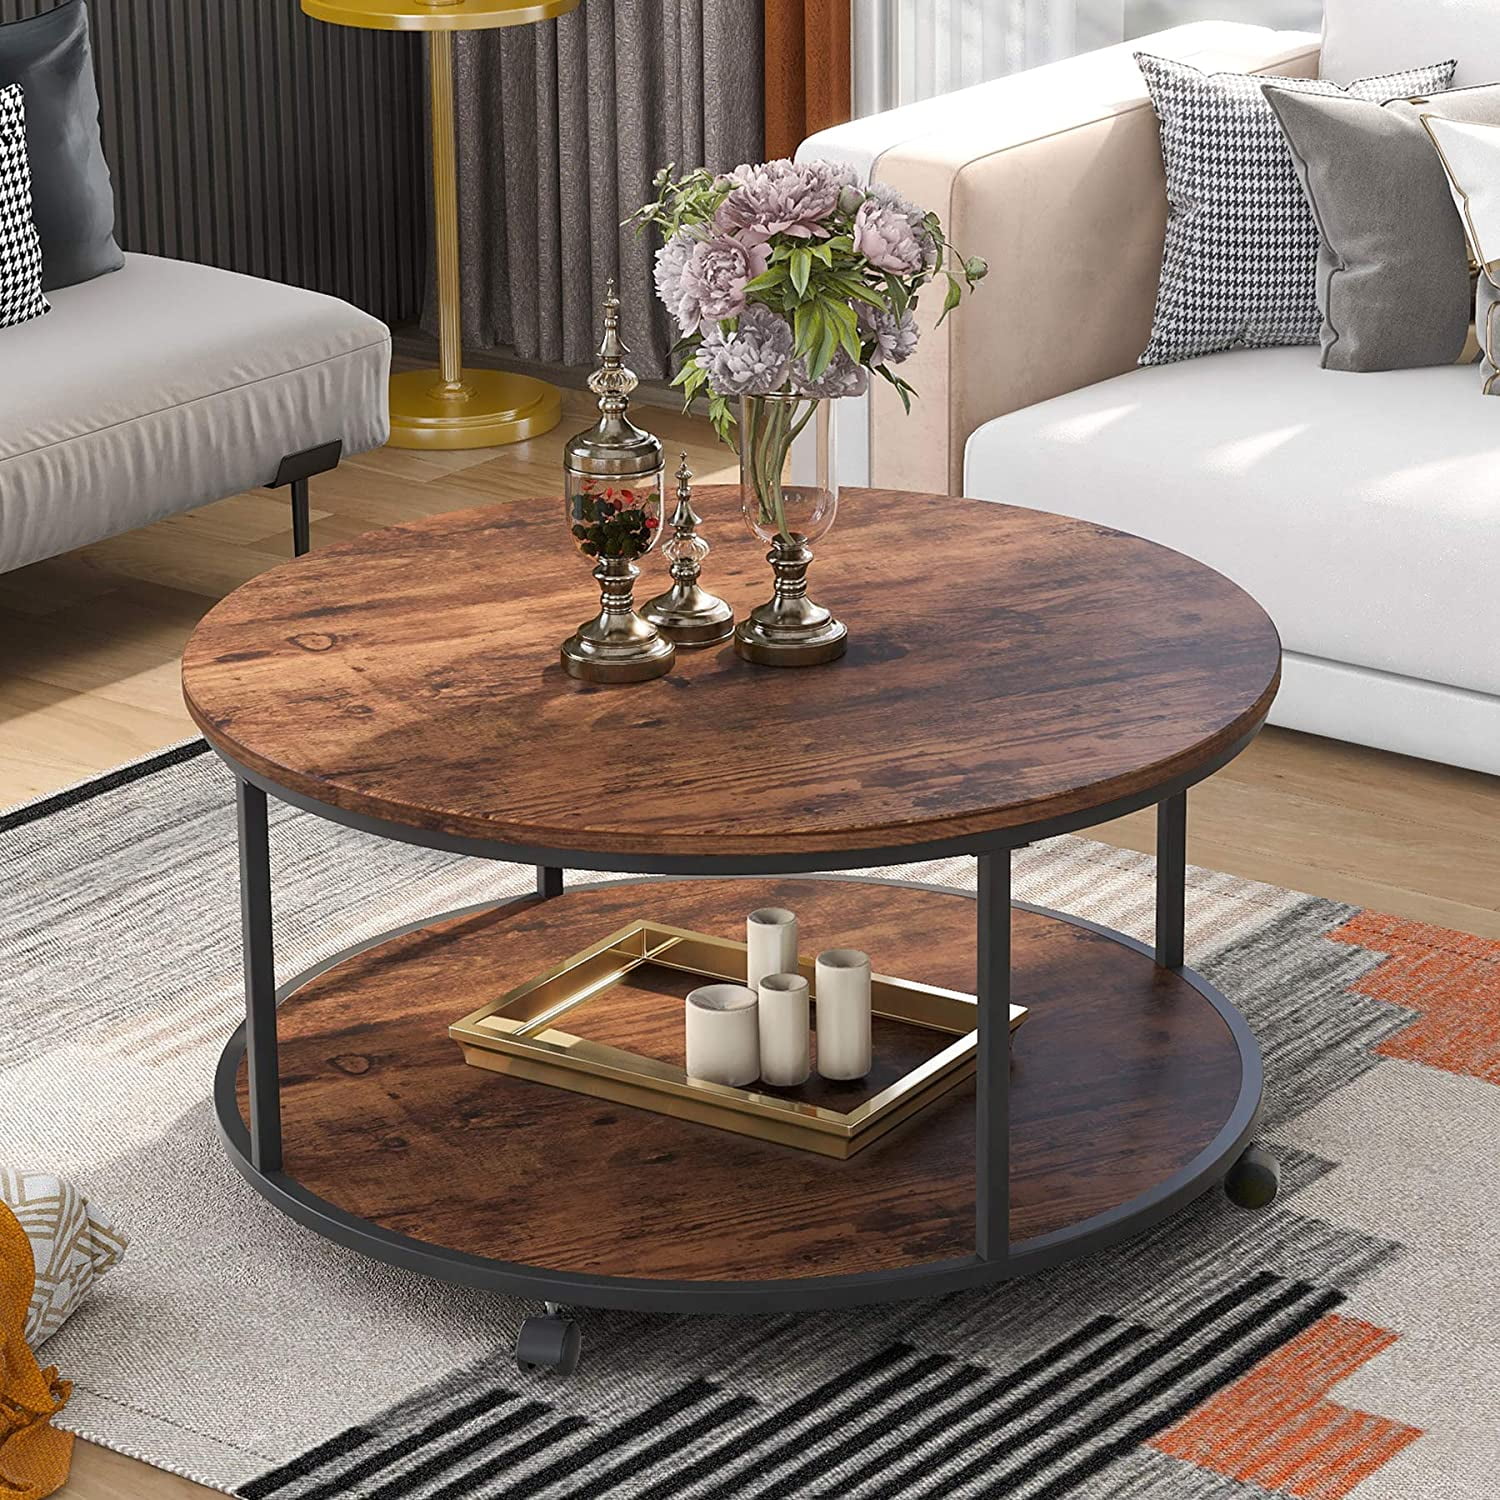 Rustic Style Coffee Table Round Coffee Table with Casters and Wood